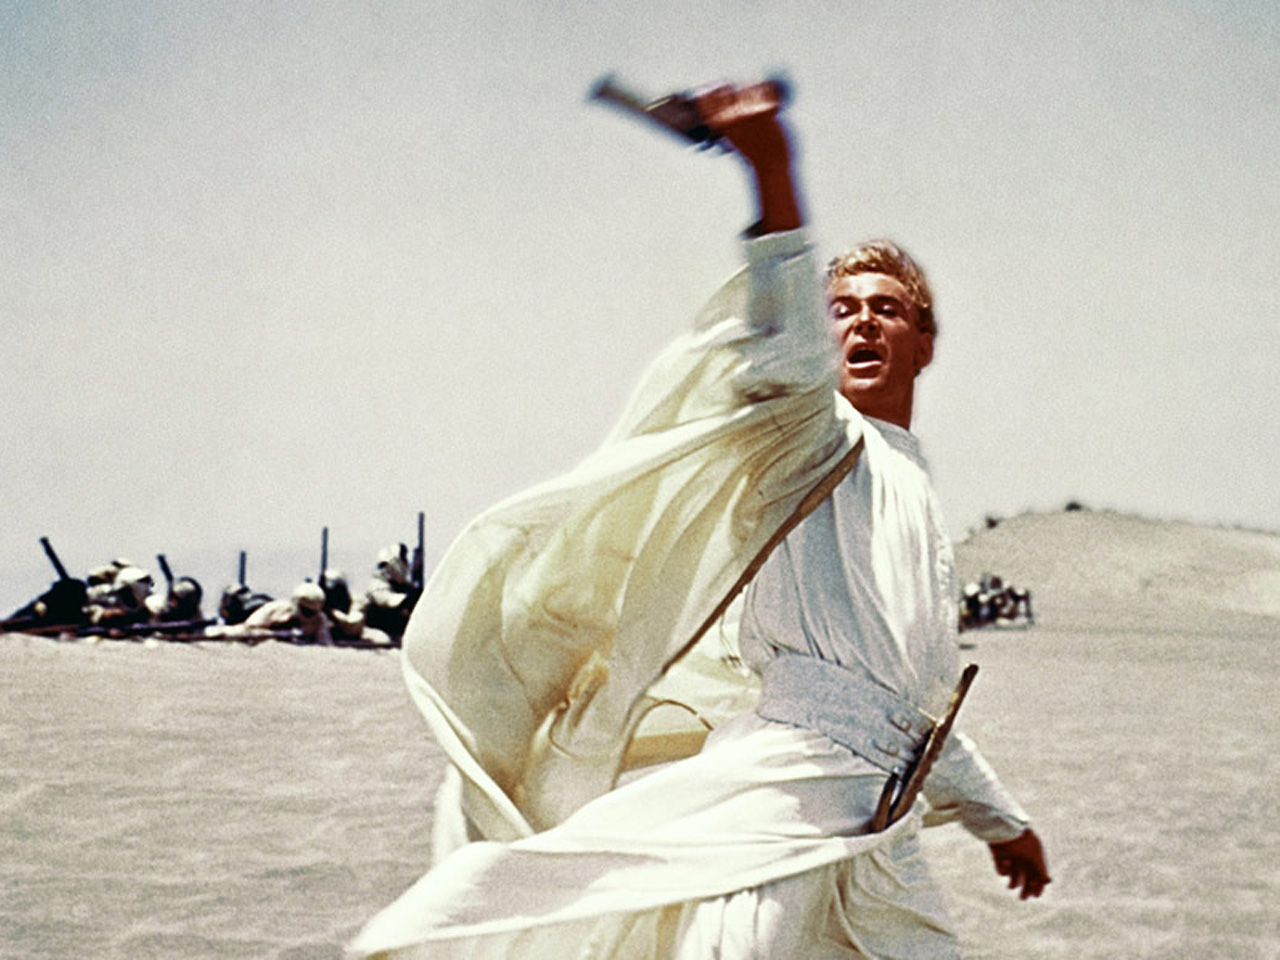 Peter O'Toole 1932-2013 - Pictures - CBS News